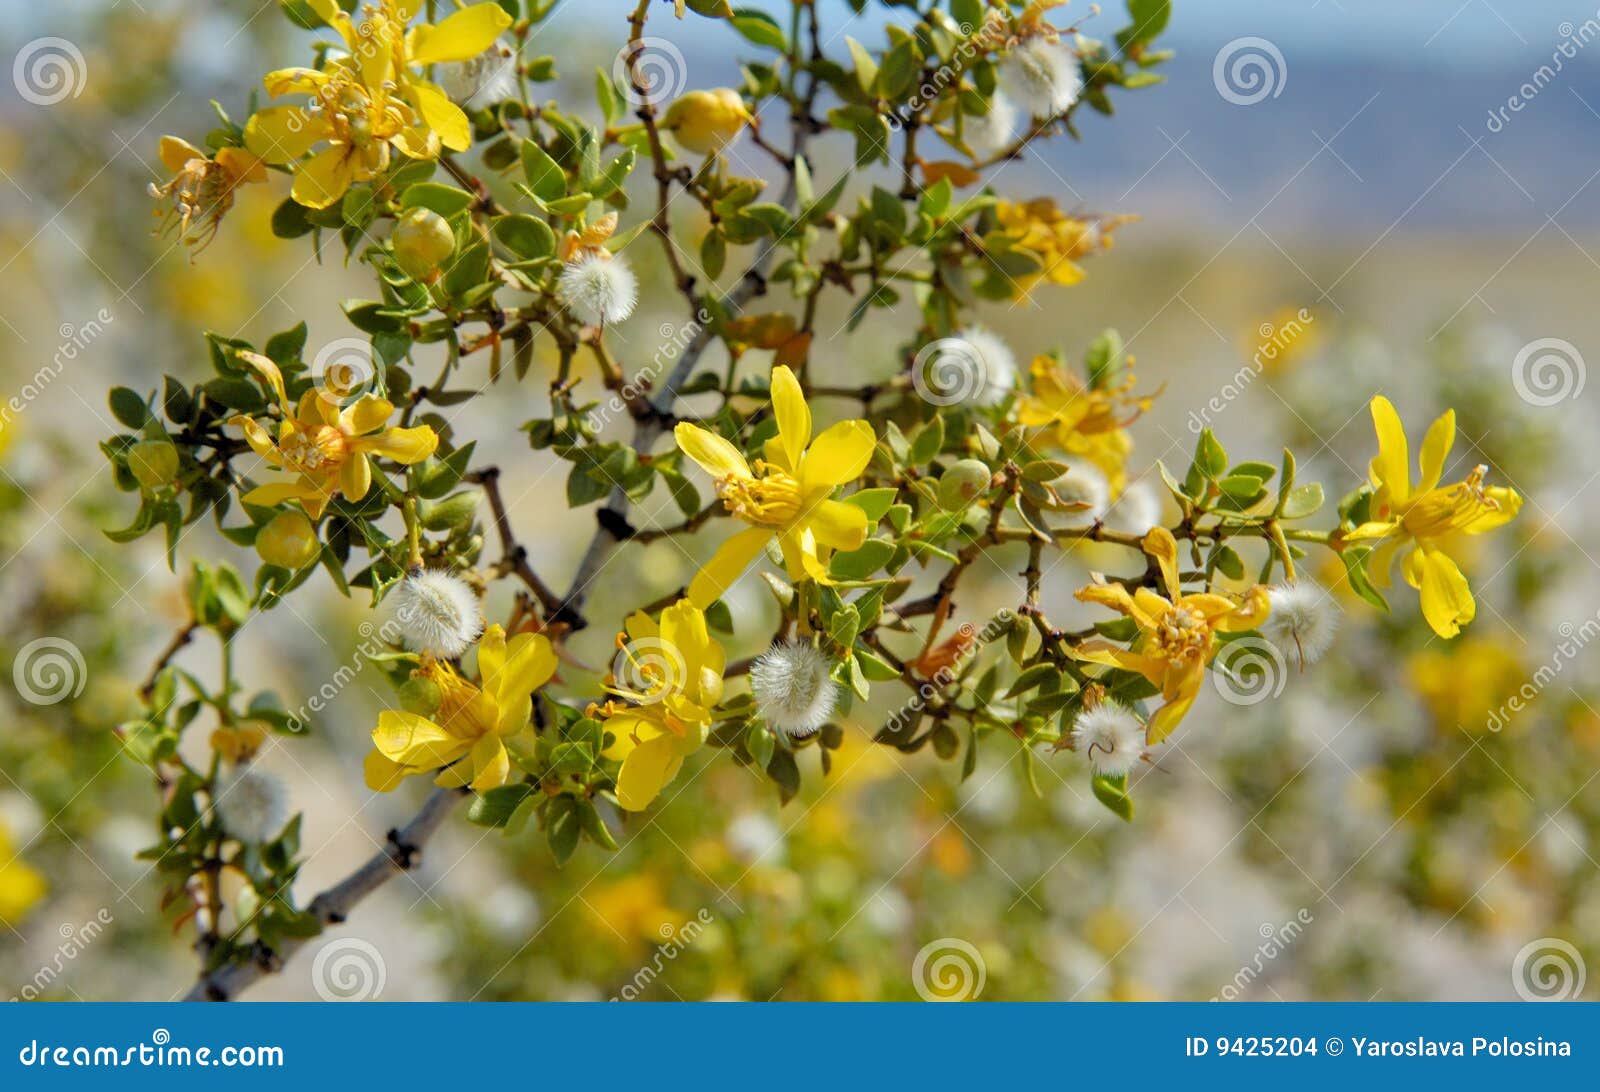 creosote bush blooming in the death valley